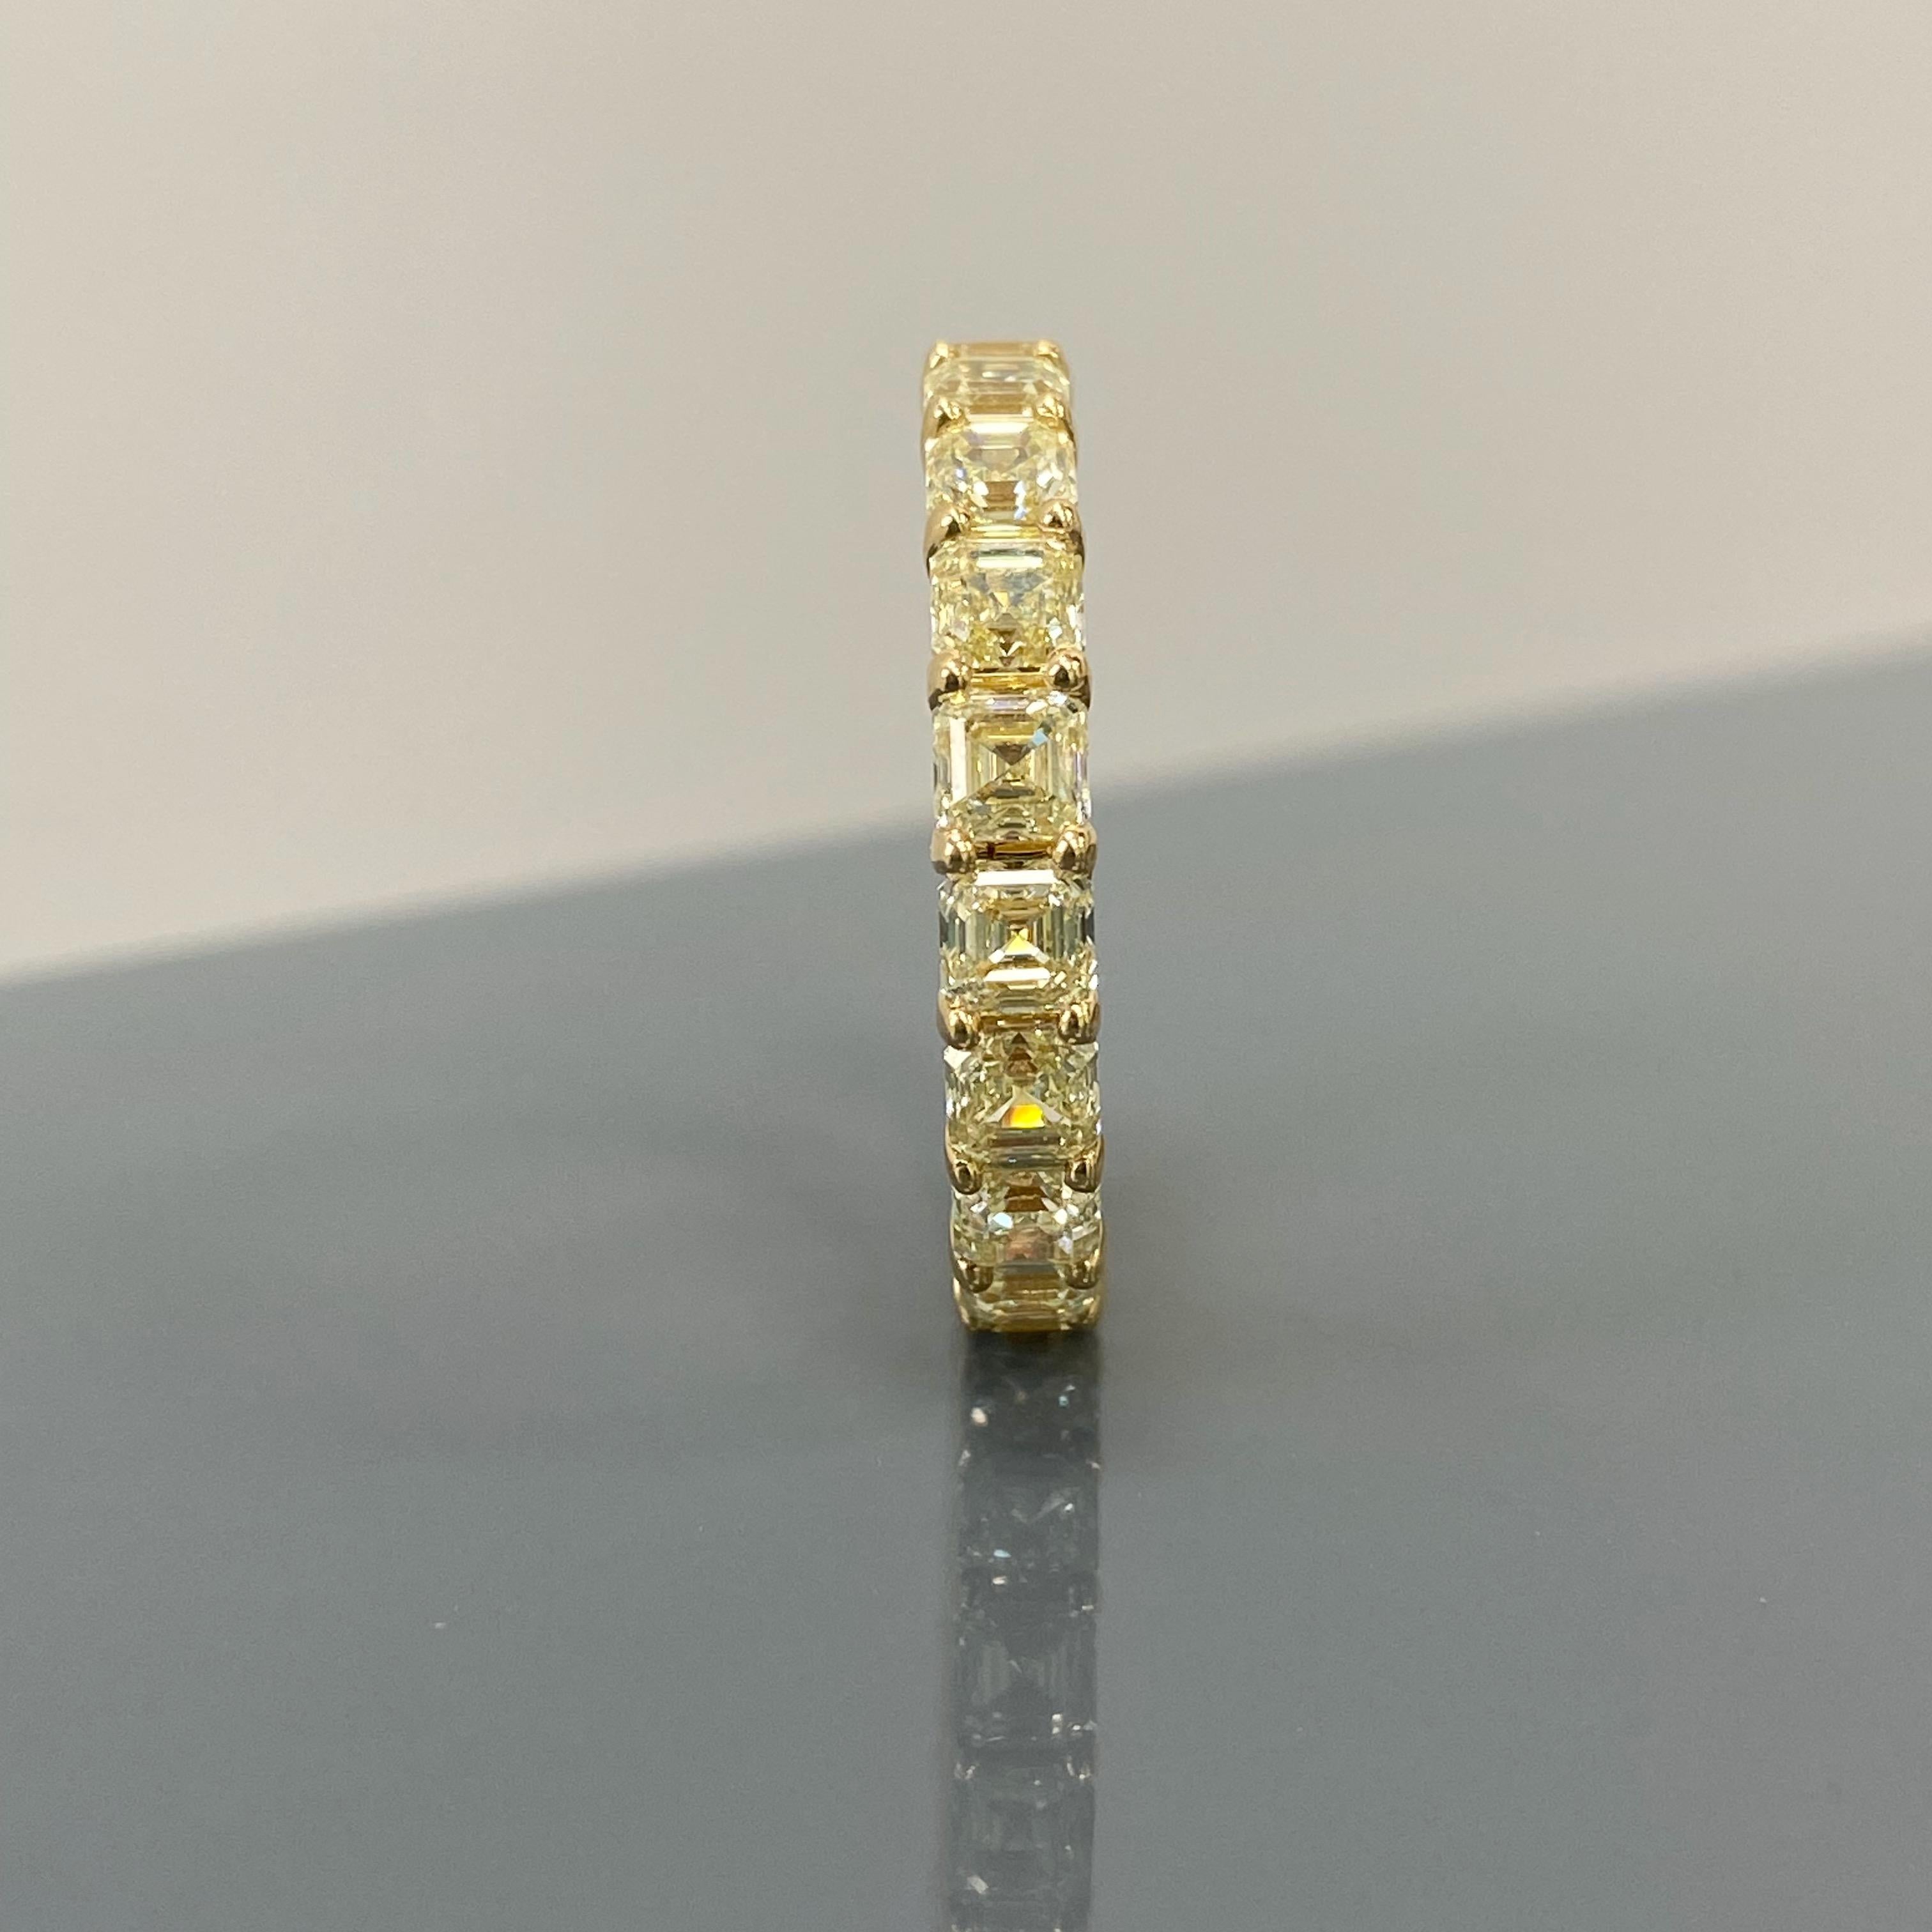 Fancy Light Yellow Diamonds
Asscher Cut Diamonds
Photos show 4 Carat Total Diamond Eternity Band 
VS-VVS Clarity
Crafted in 18k yellow gold
Handmade in NYC
Custom Order Will Ship in 3-4 Weeks 

This piece can be viewed before purchase in our